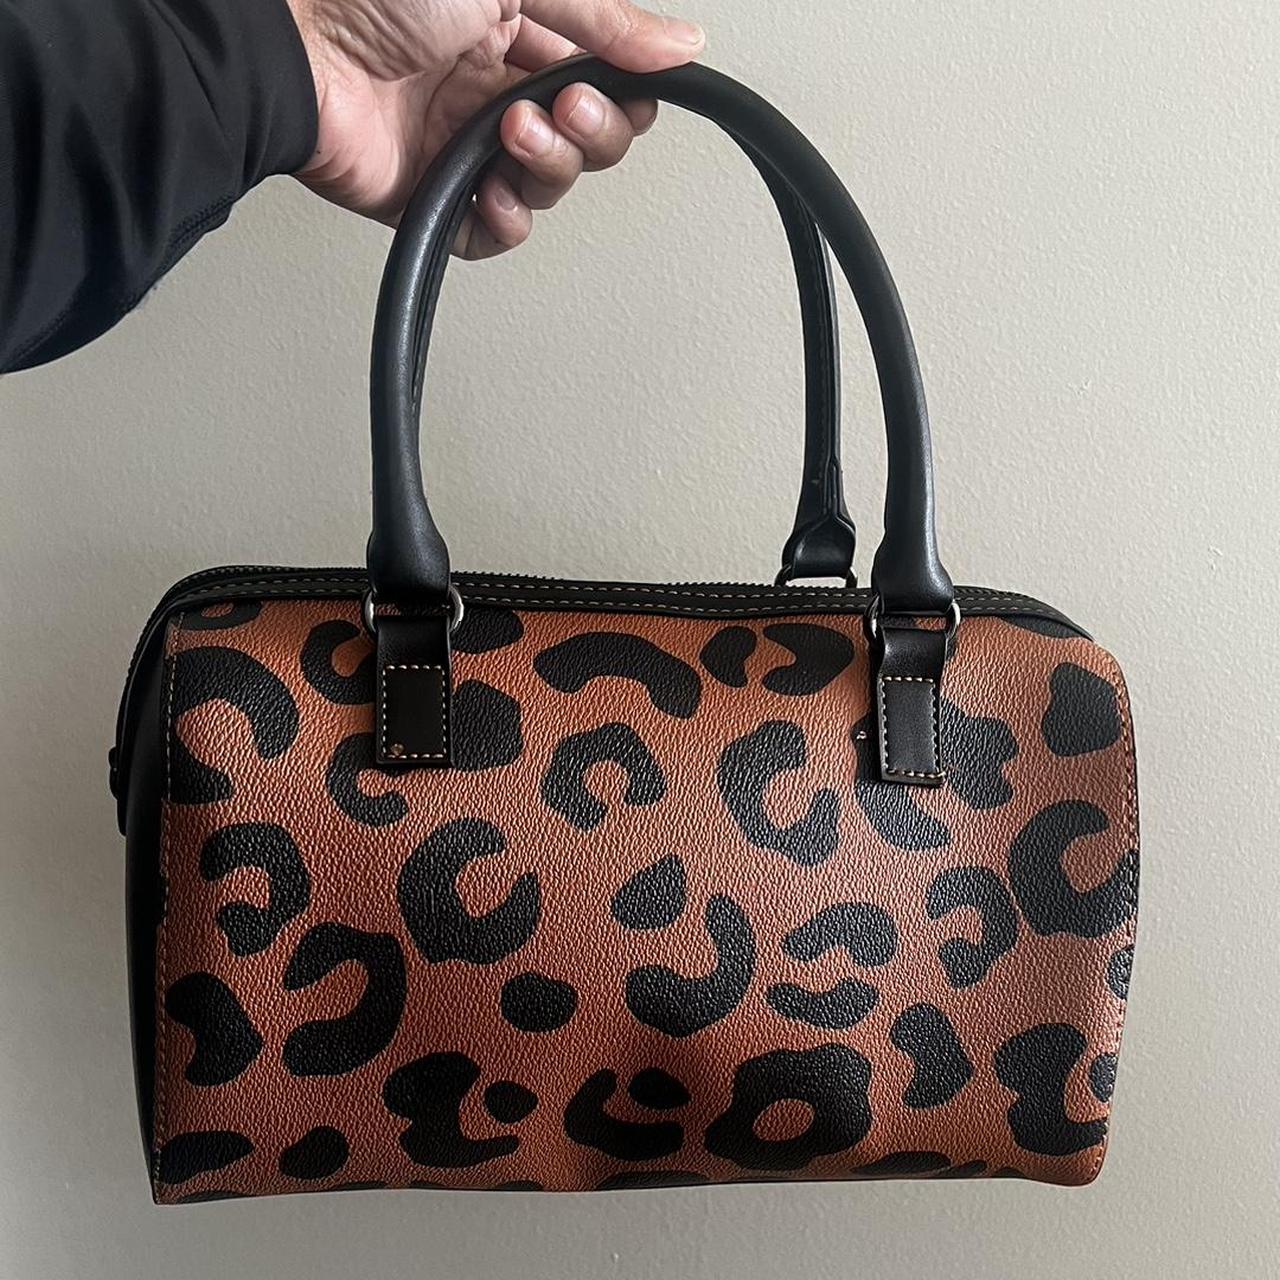 Leopard print purse, comes with additional straps - Depop